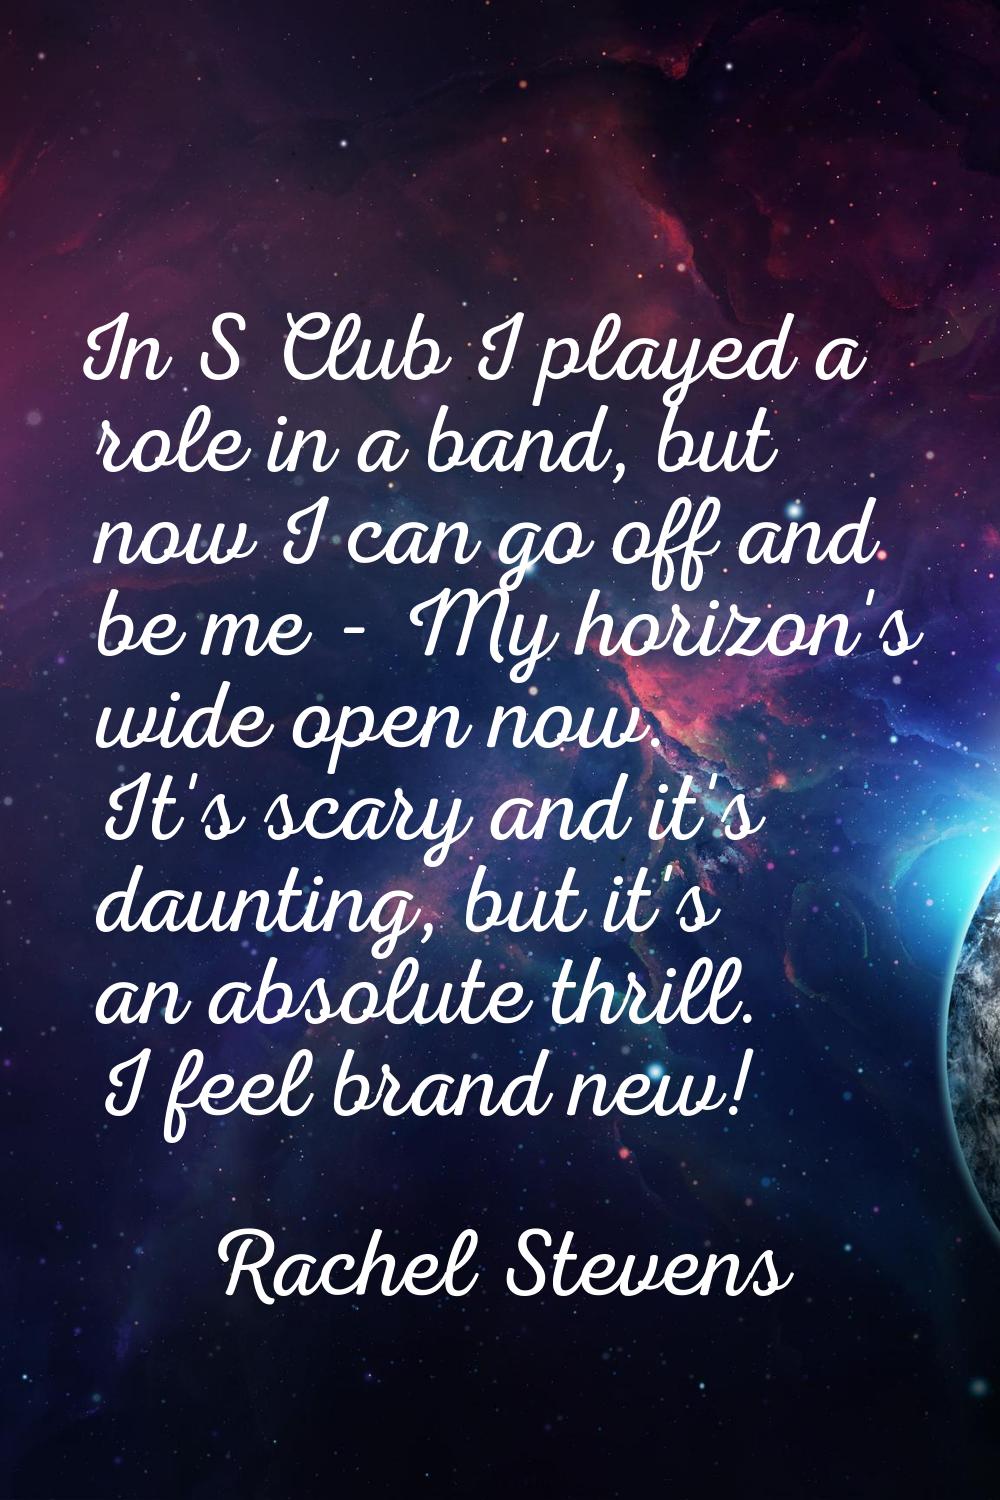 In S Club I played a role in a band, but now I can go off and be me - My horizon's wide open now. I